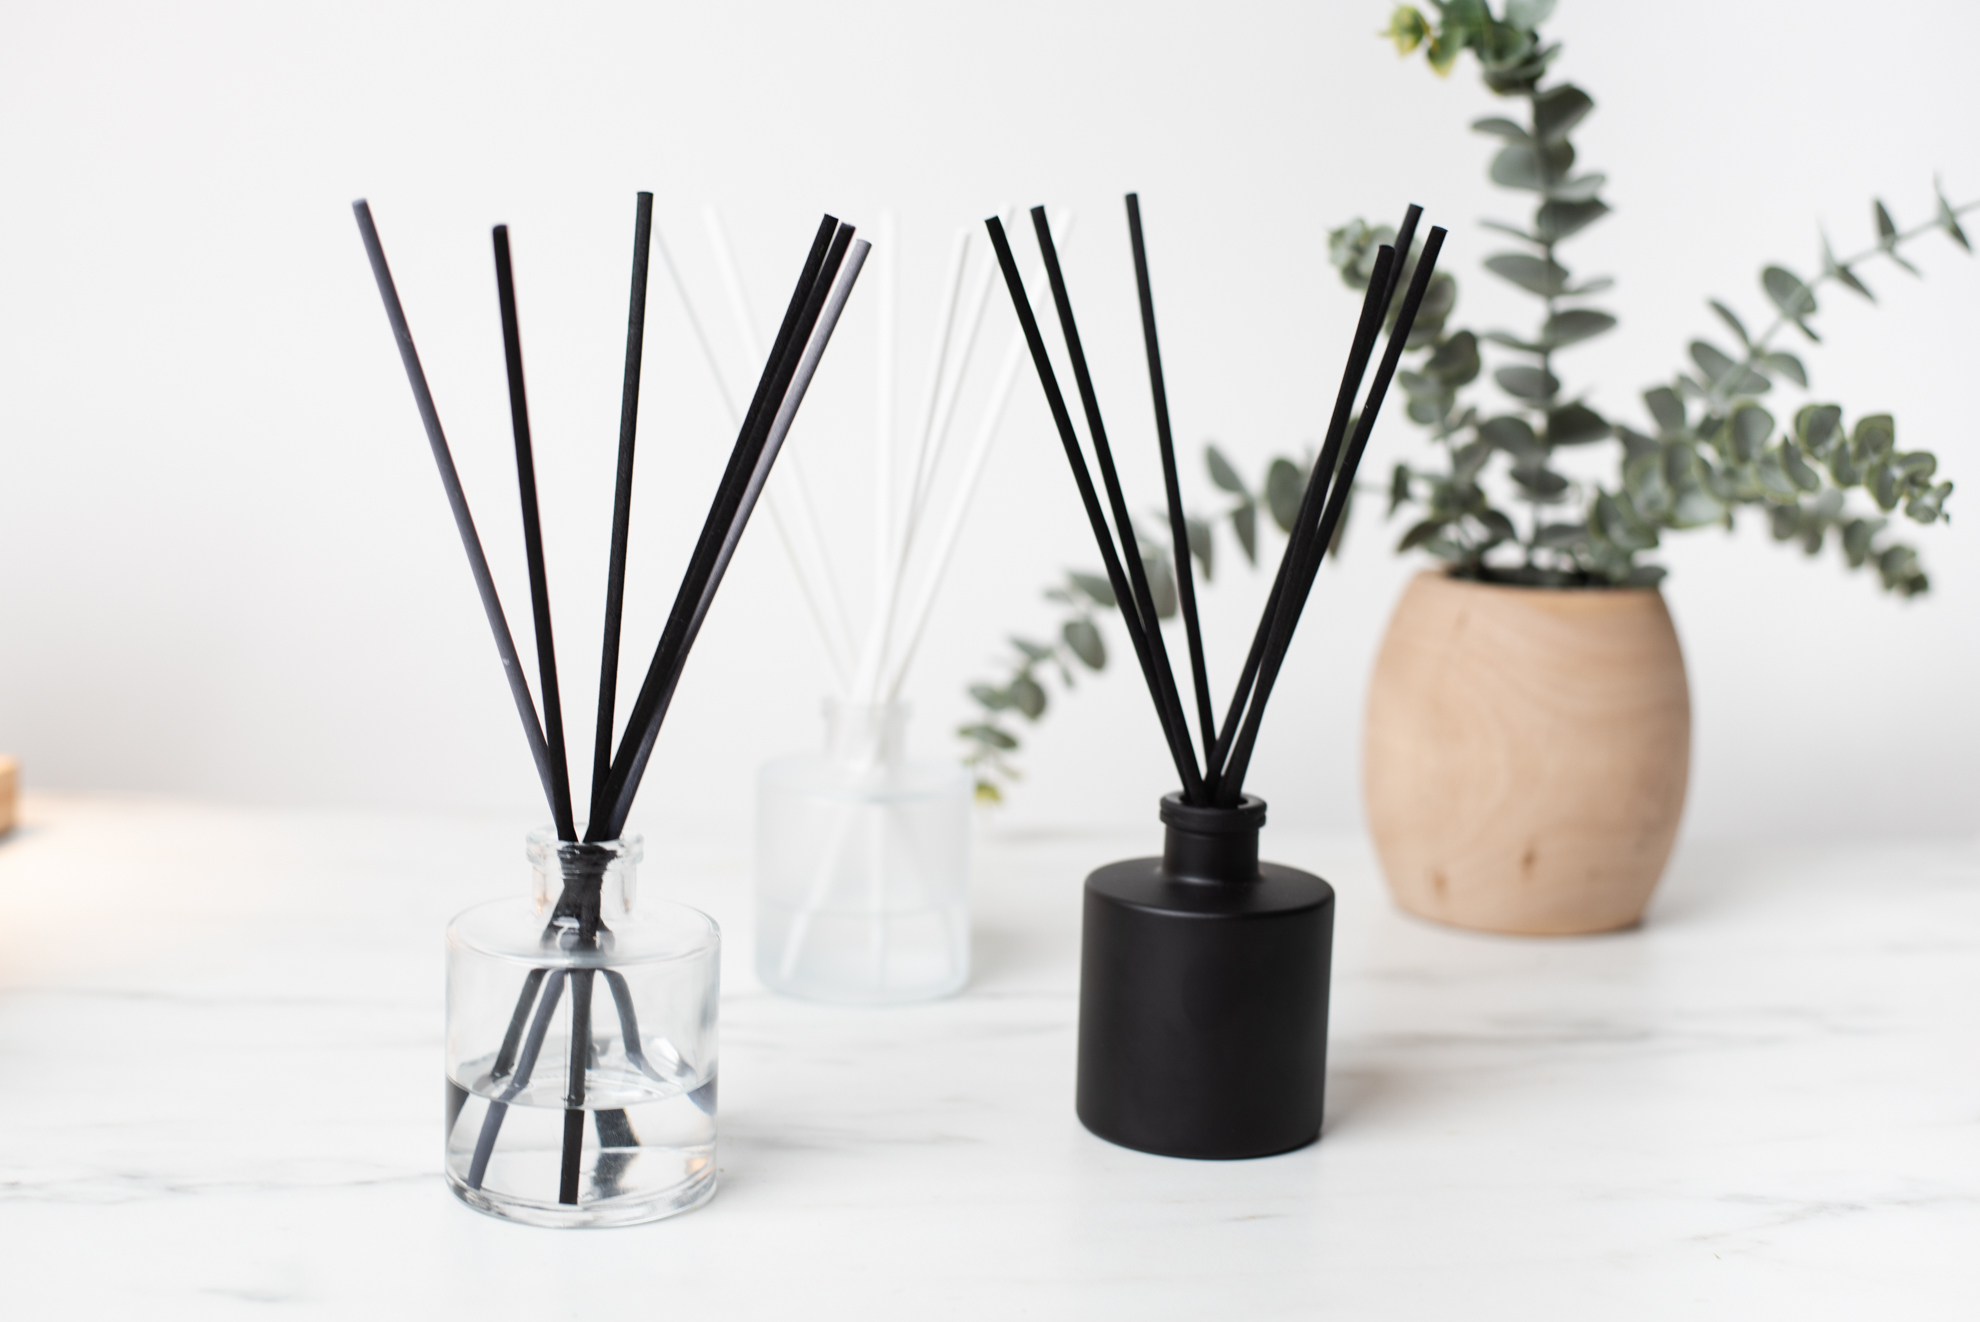 Three reed diffusers all in round jars, one is frosted glass, one is clear glass, and one is matte black. The reed diffusers are filled with black and white reed sticks. 